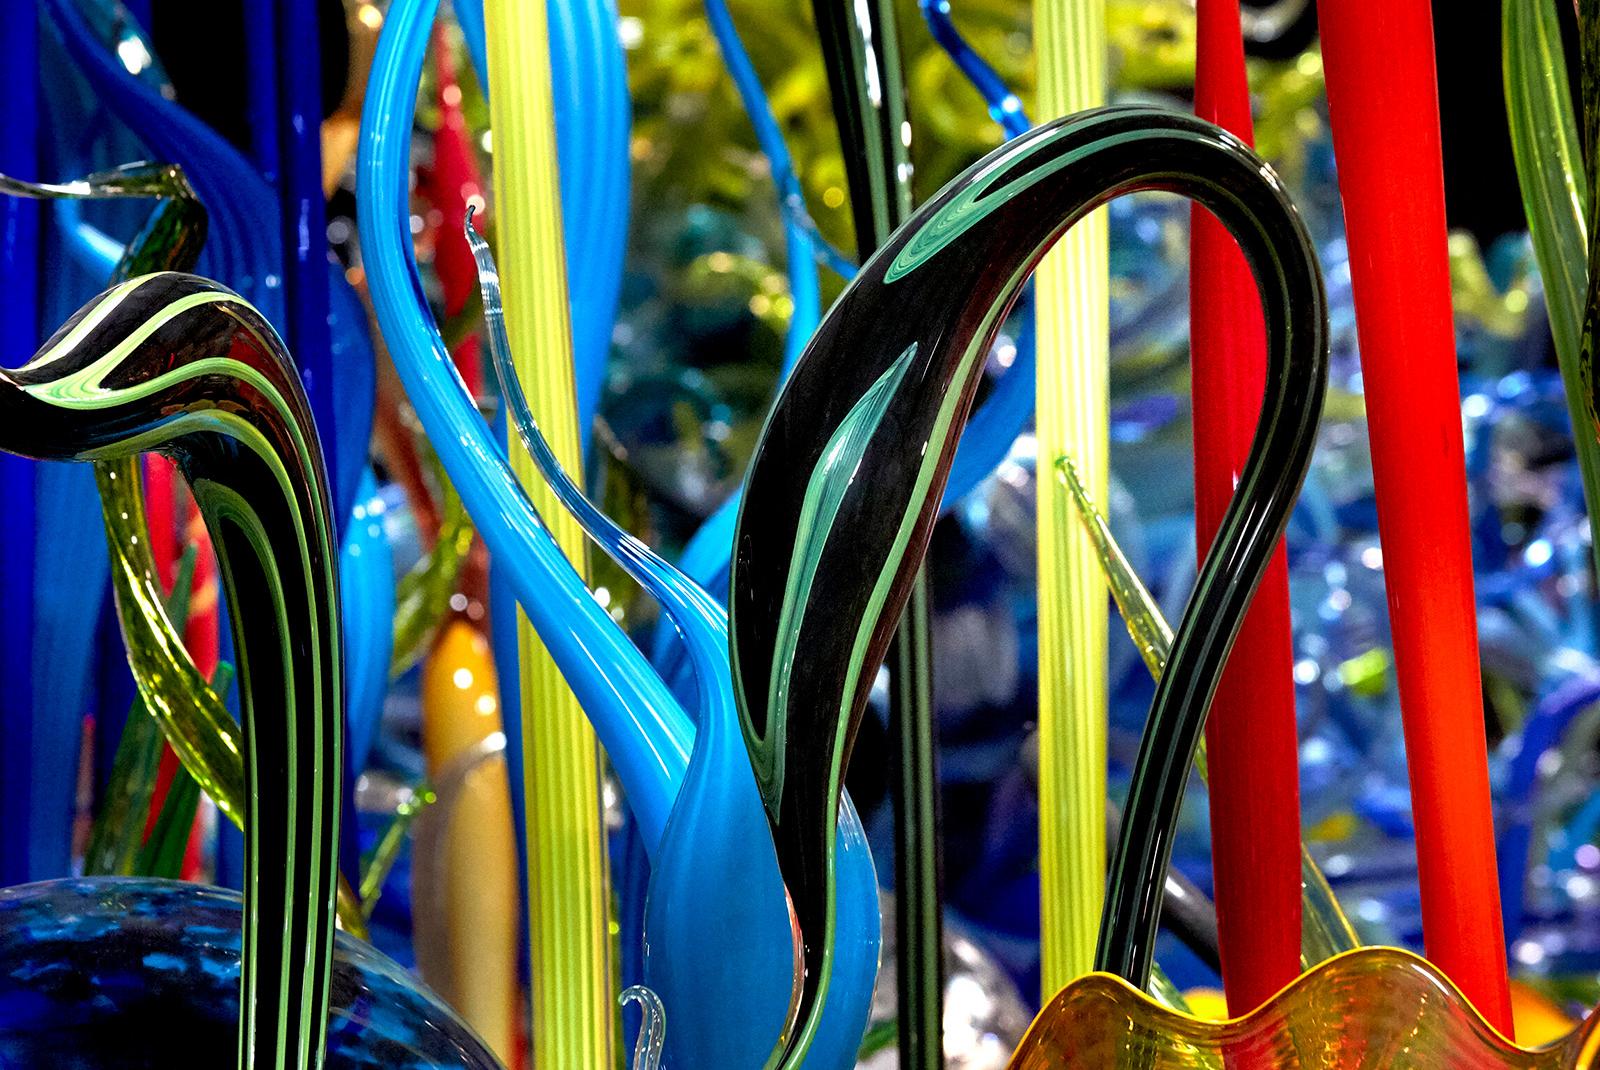 Dale Chihuly, Mille Fiori (detail), 2018